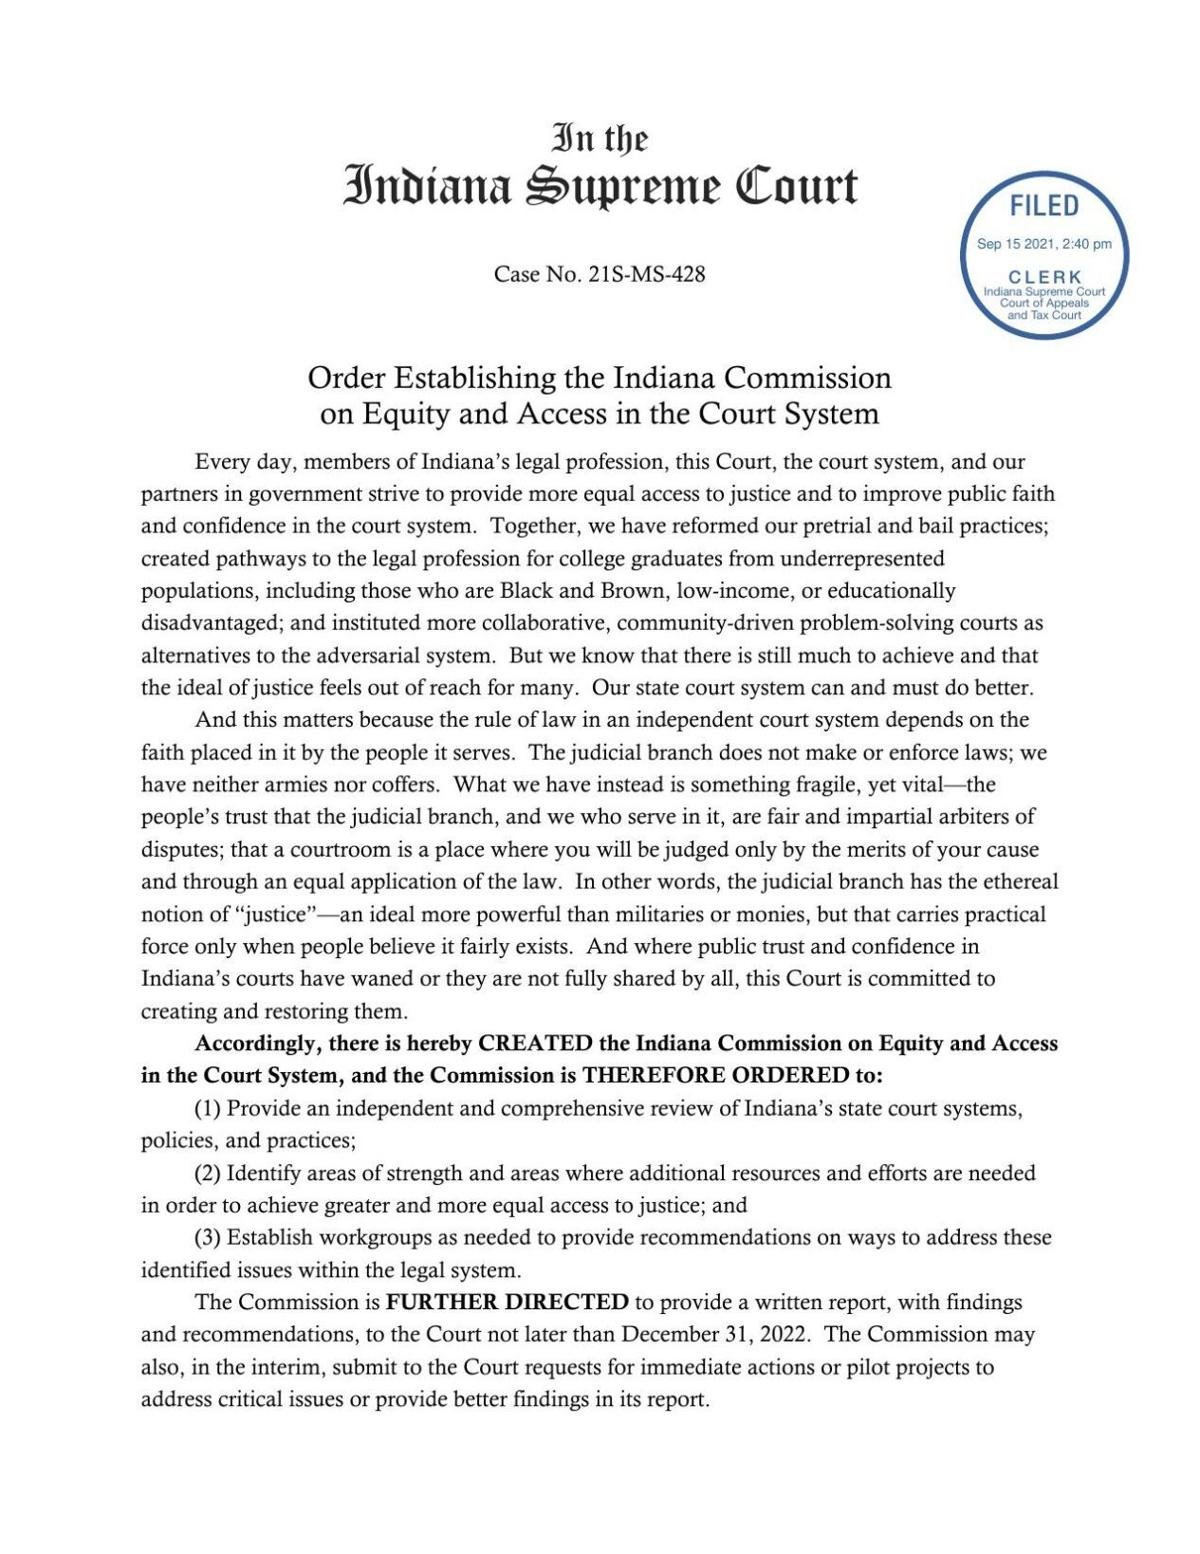 Order Establishing the Indiana Commission on Equity and Access in the Court System